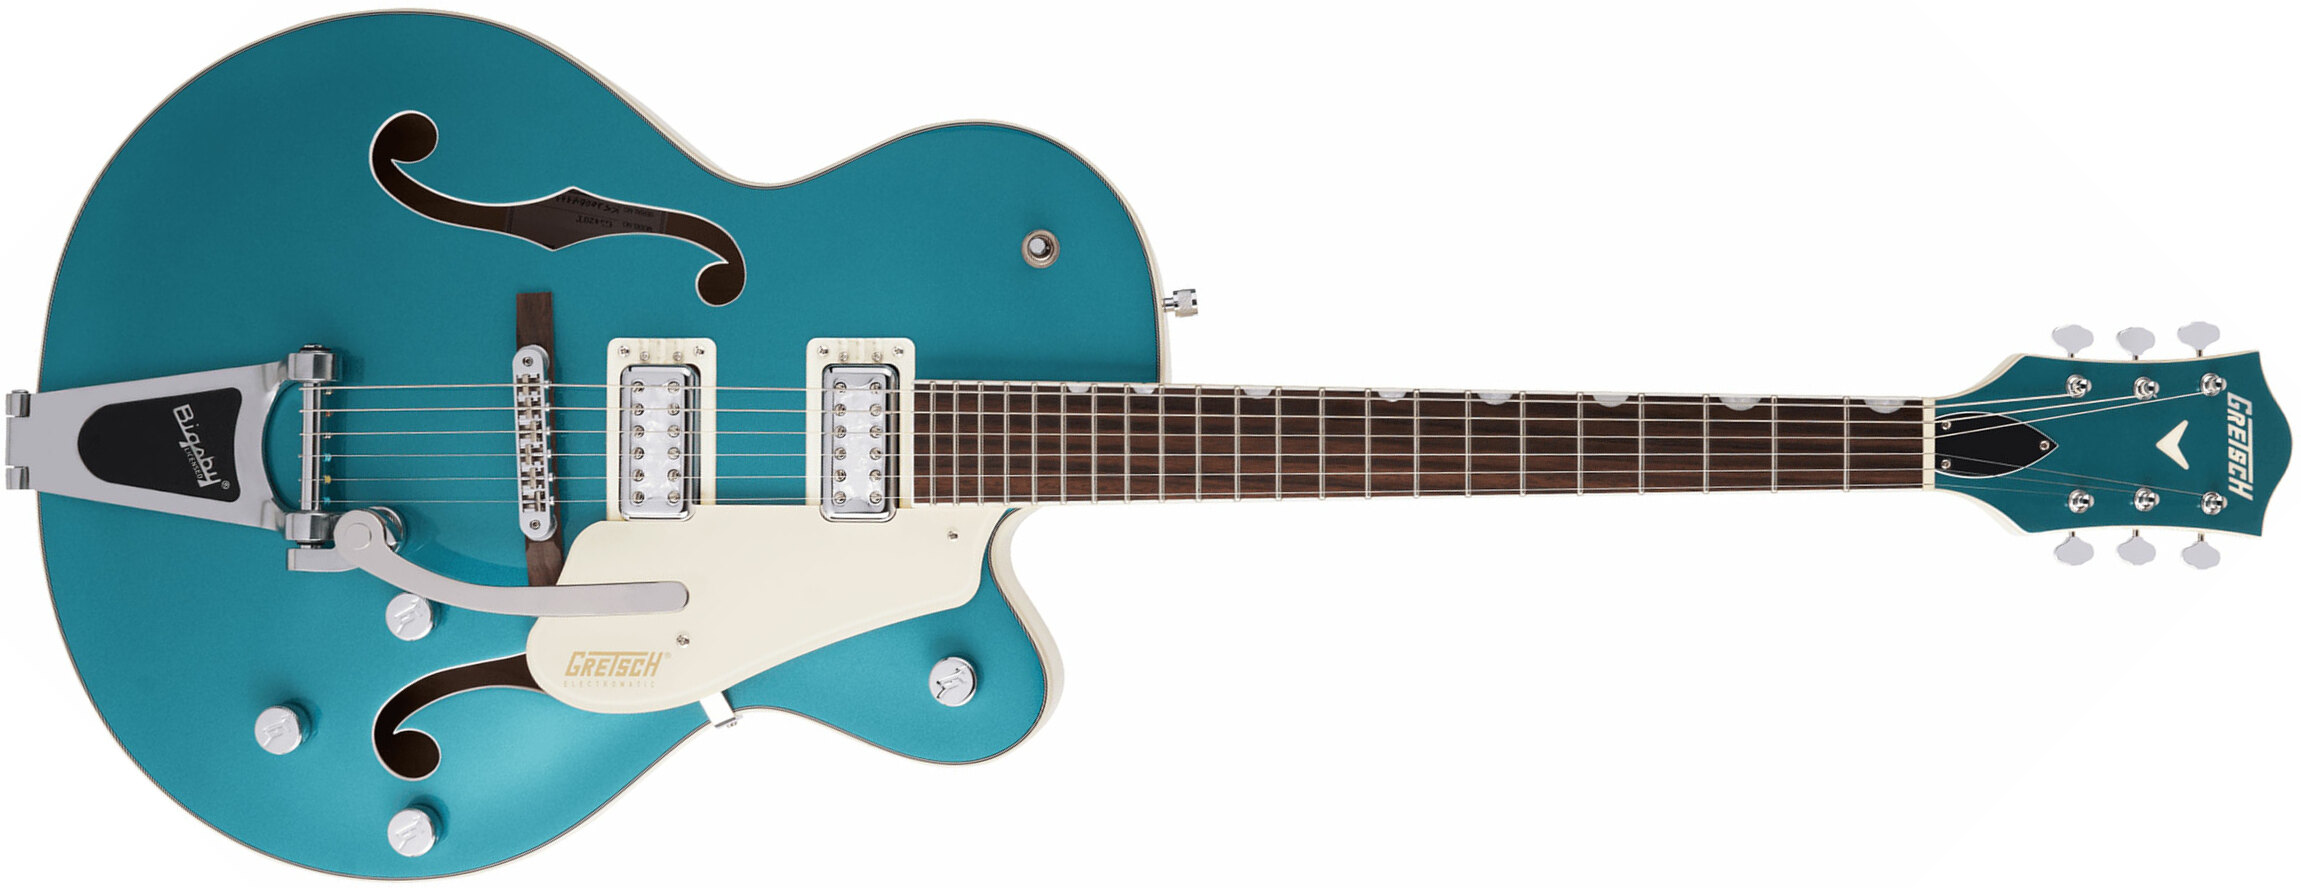 Gretsch G5410t Tri-five Electromatic Hollow Hh Bigsby Rw - Two-tone Ocean Turquoise/vintage White - Semi-hollow electric guitar - Main picture